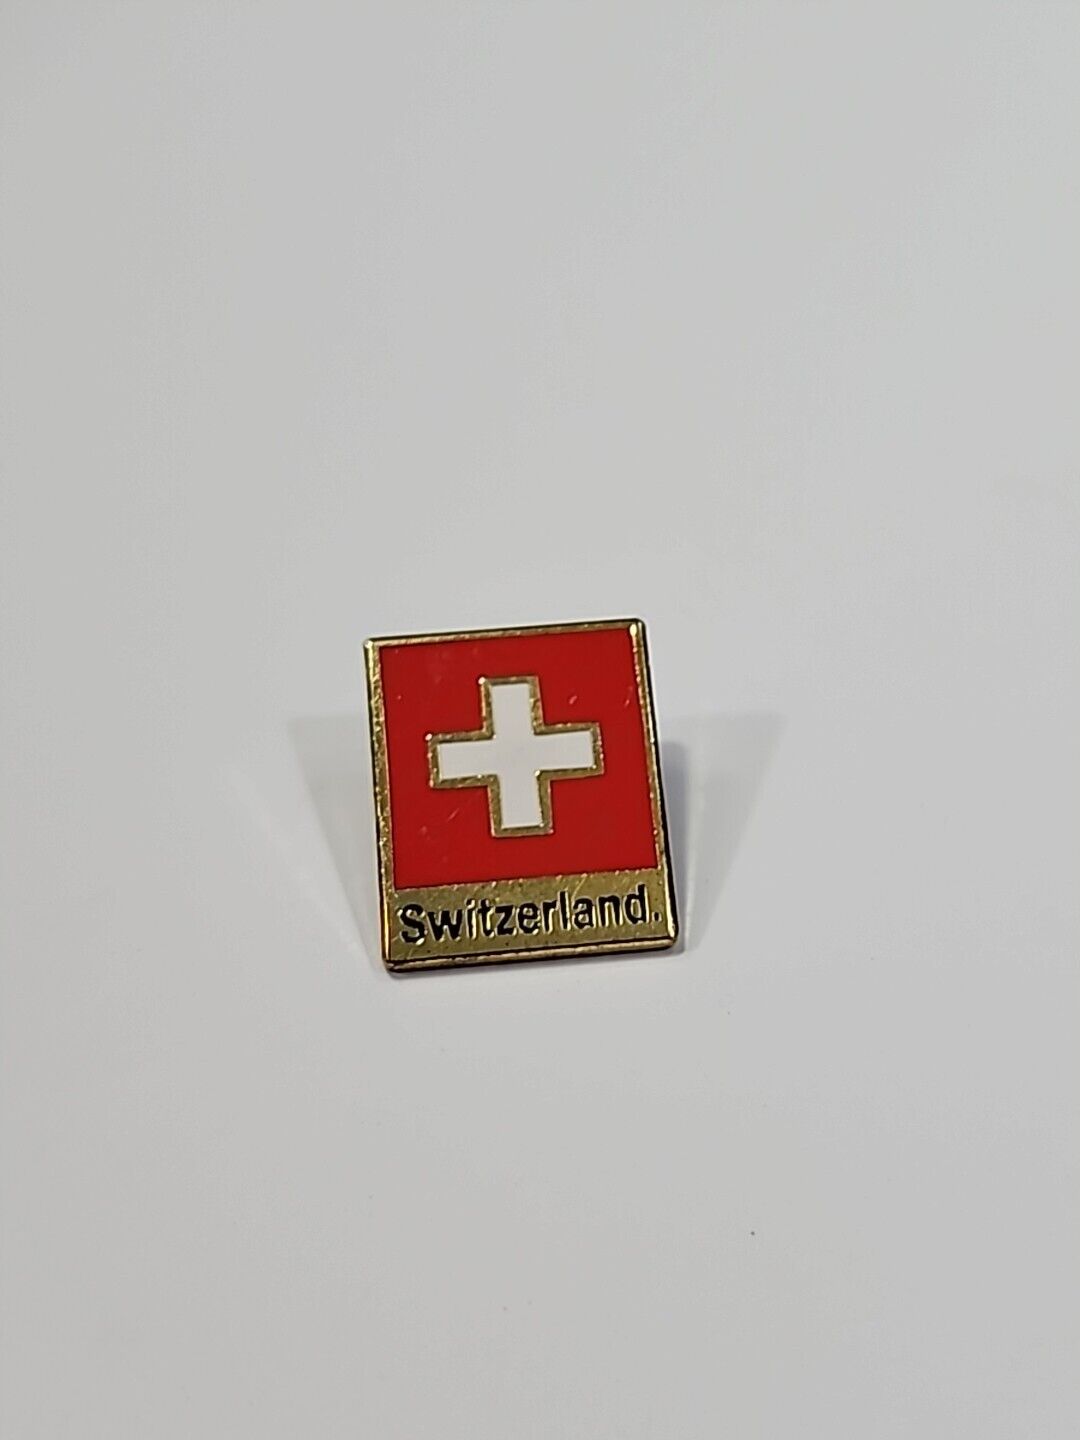 Switzerland Flag Souvenir Lapel Pin Red With White Cross*